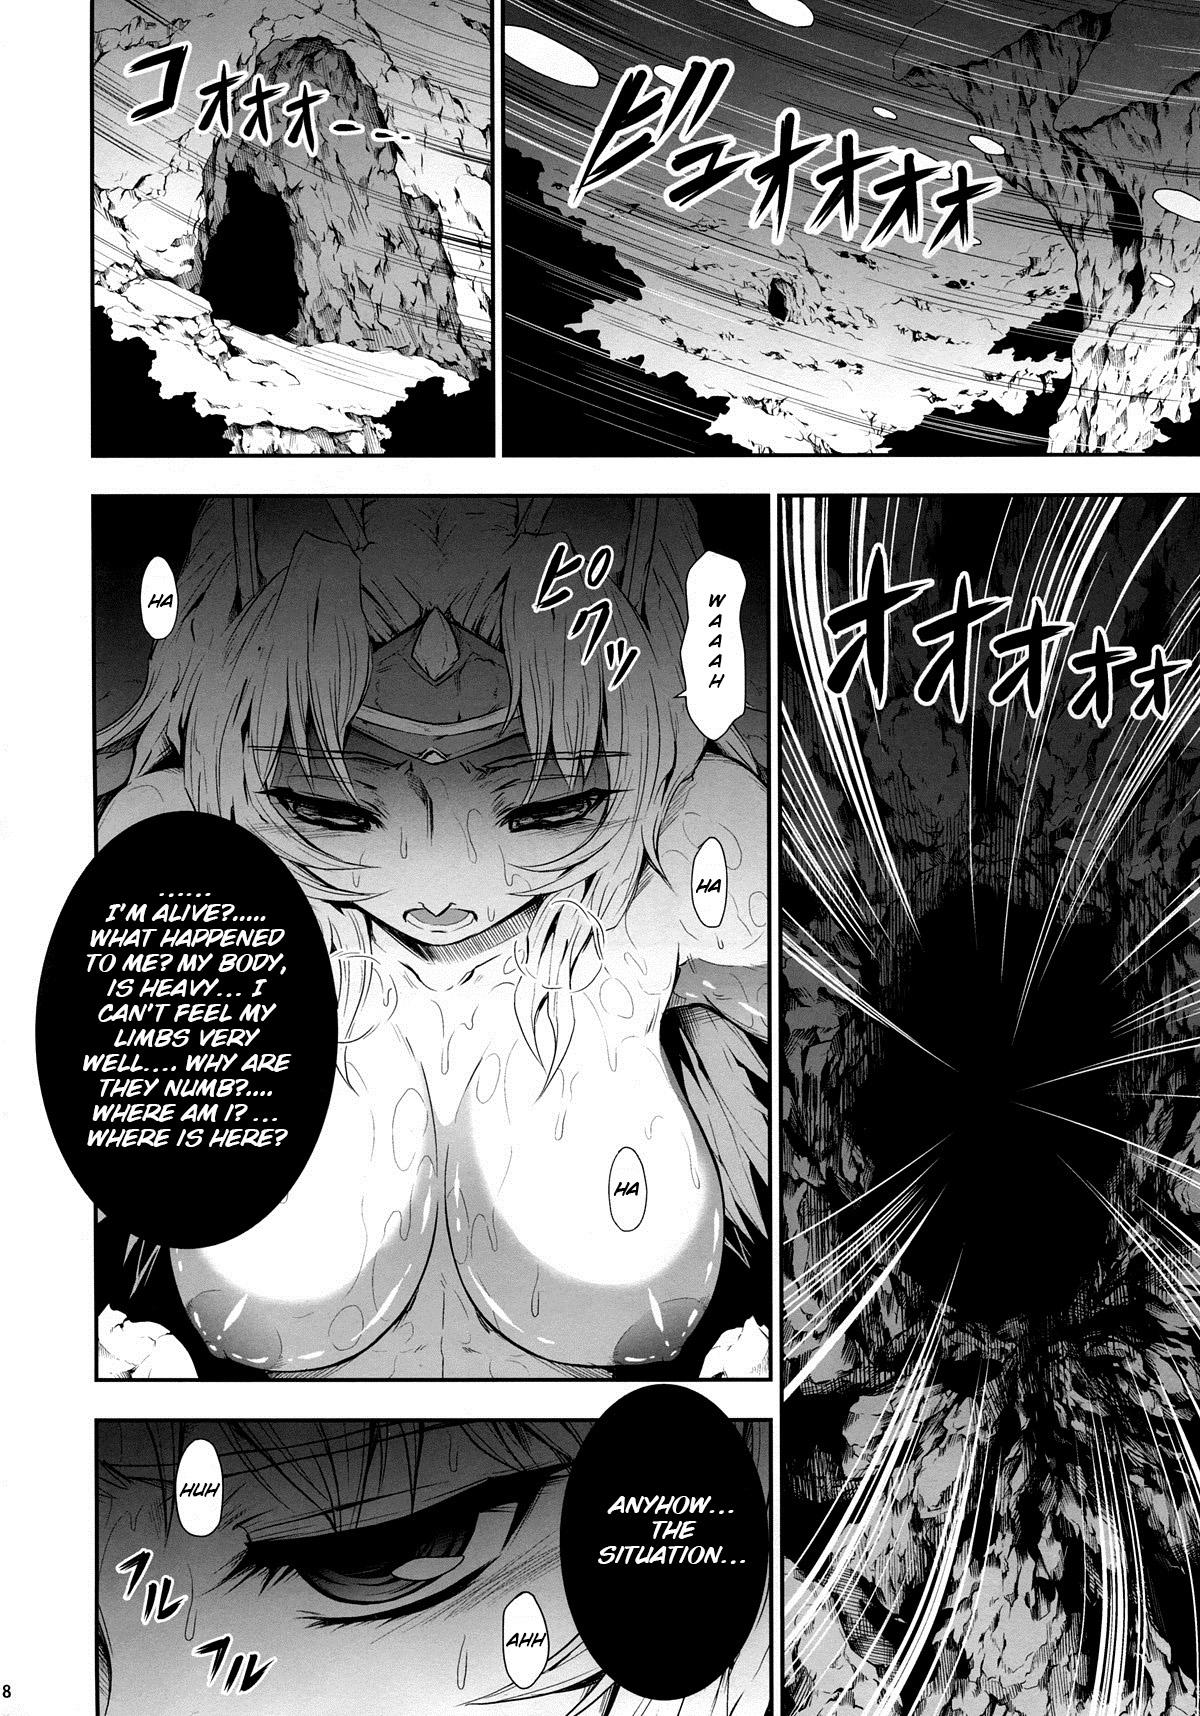 Erotic Solo Hunter no Seitai 4 The third part - Monster hunter Rough Sex - Page 8